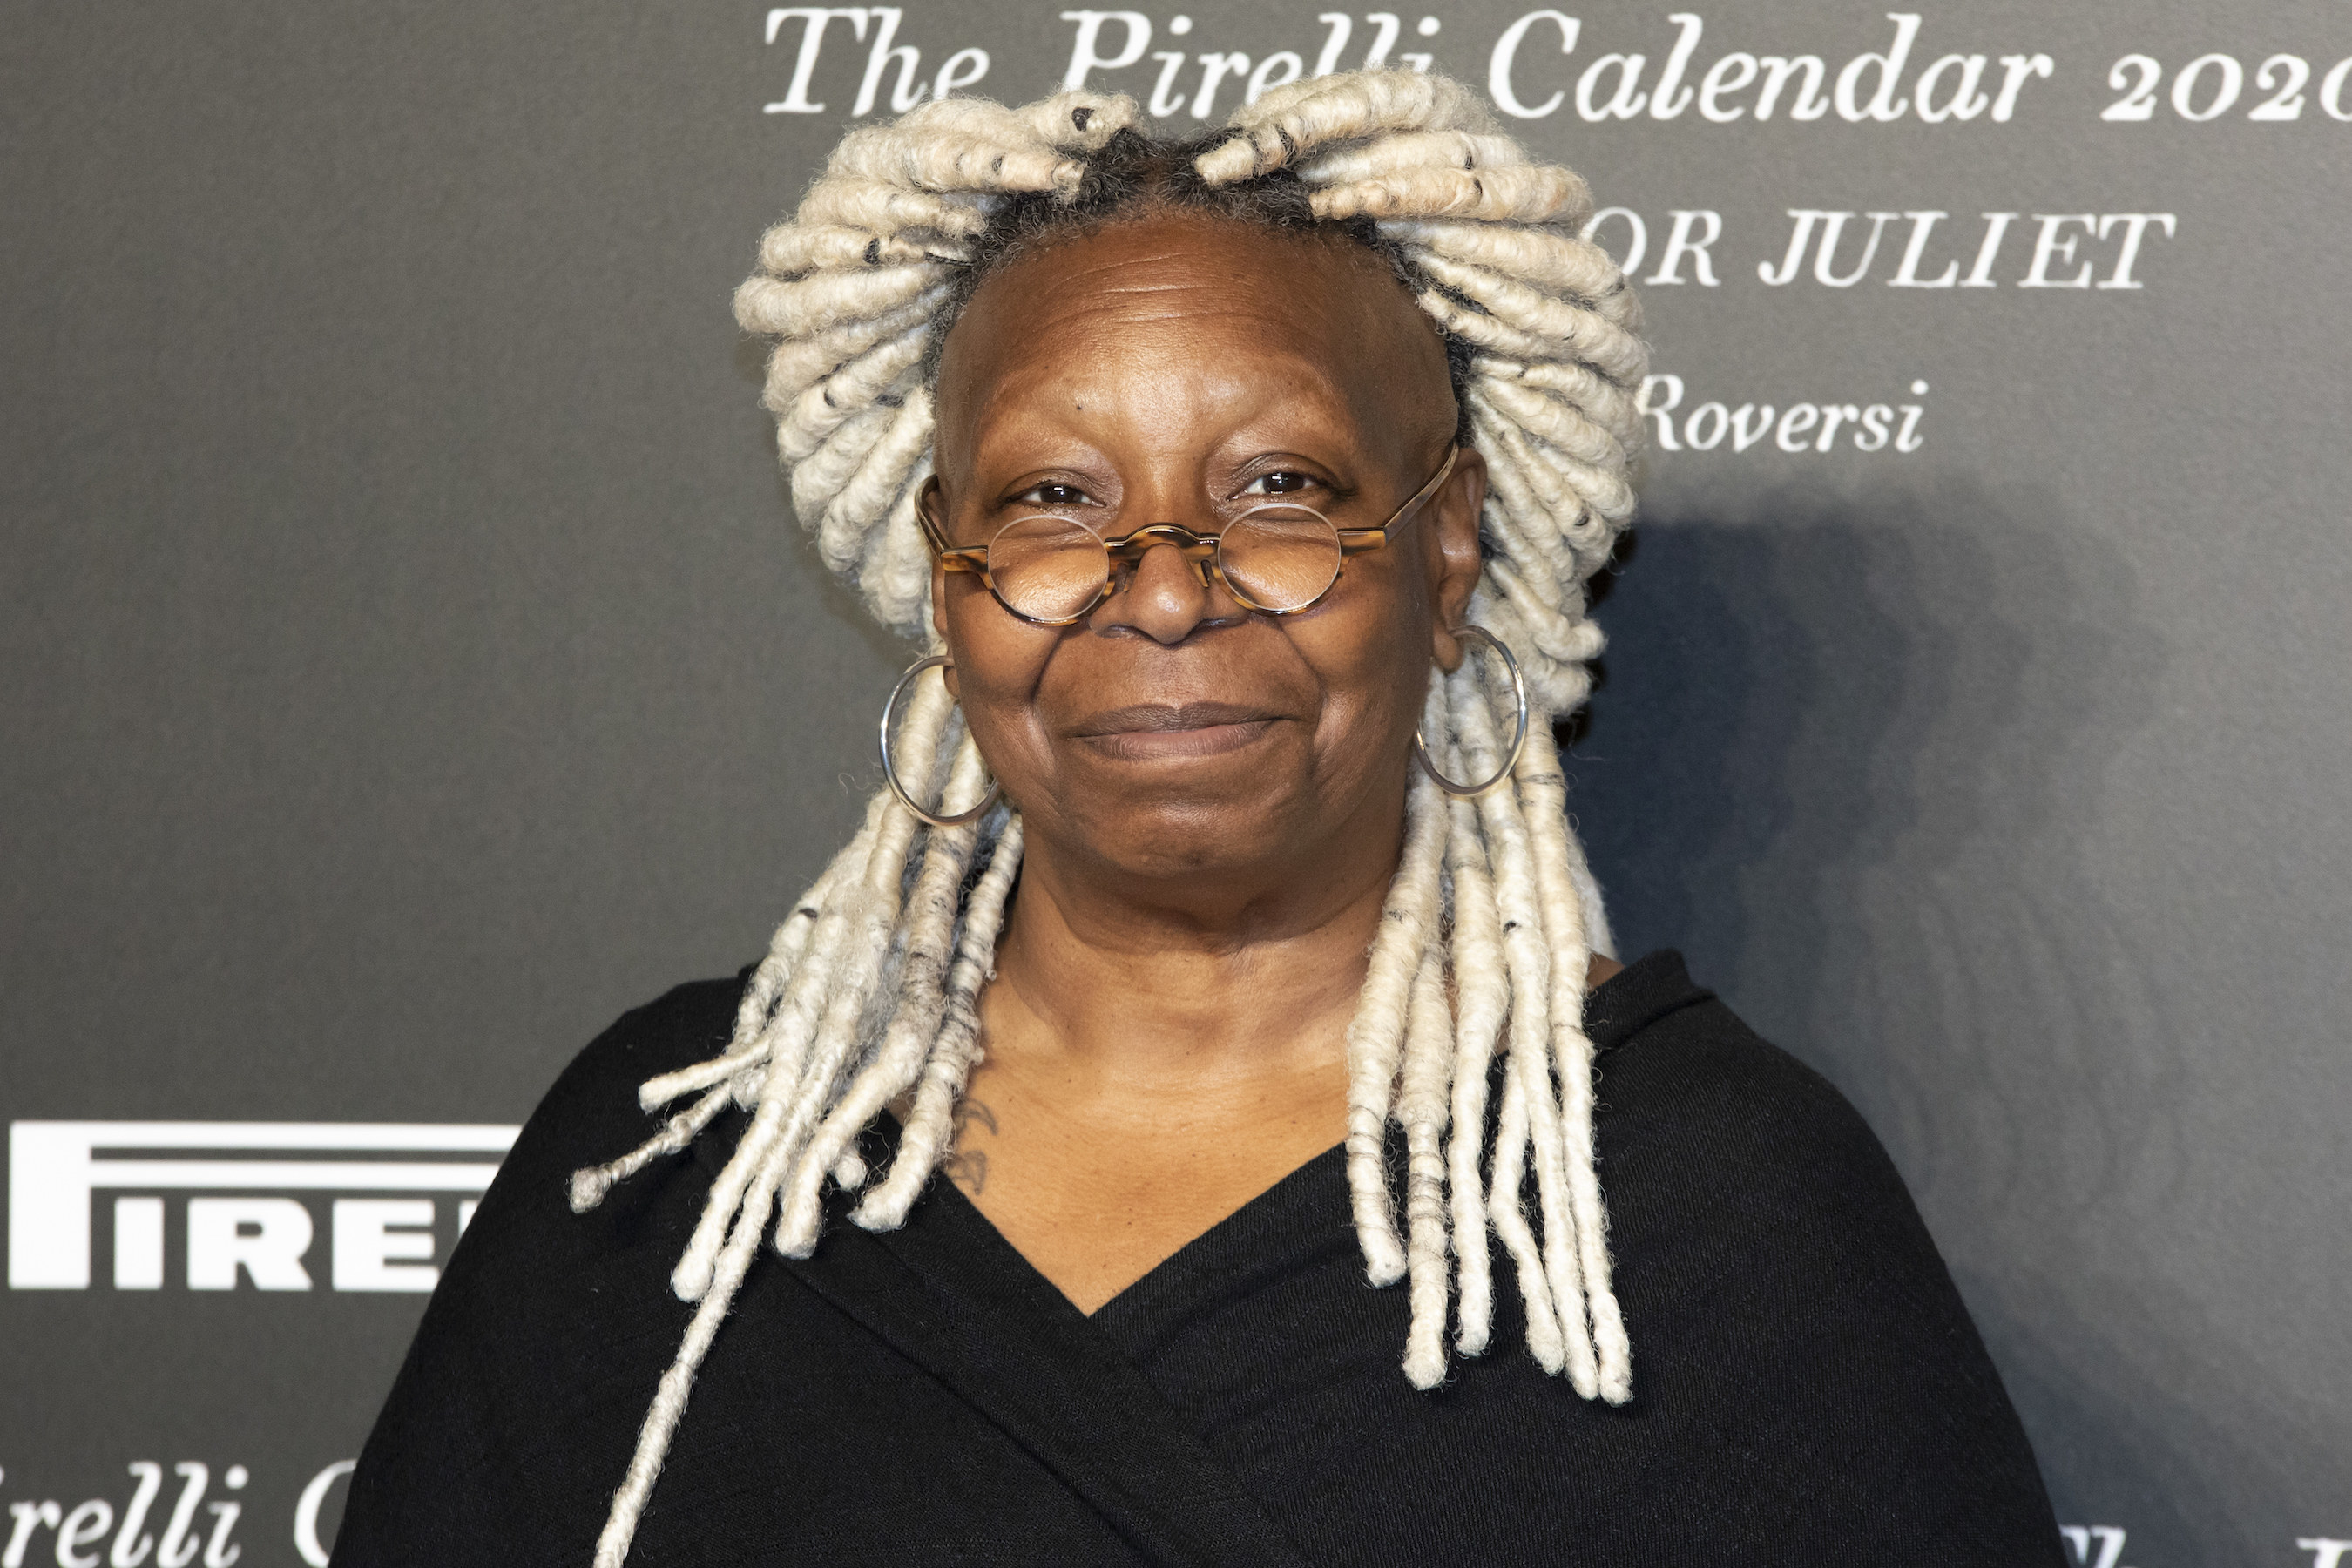 Whoopi Goldberg Doesn't Have Any Eyebrows